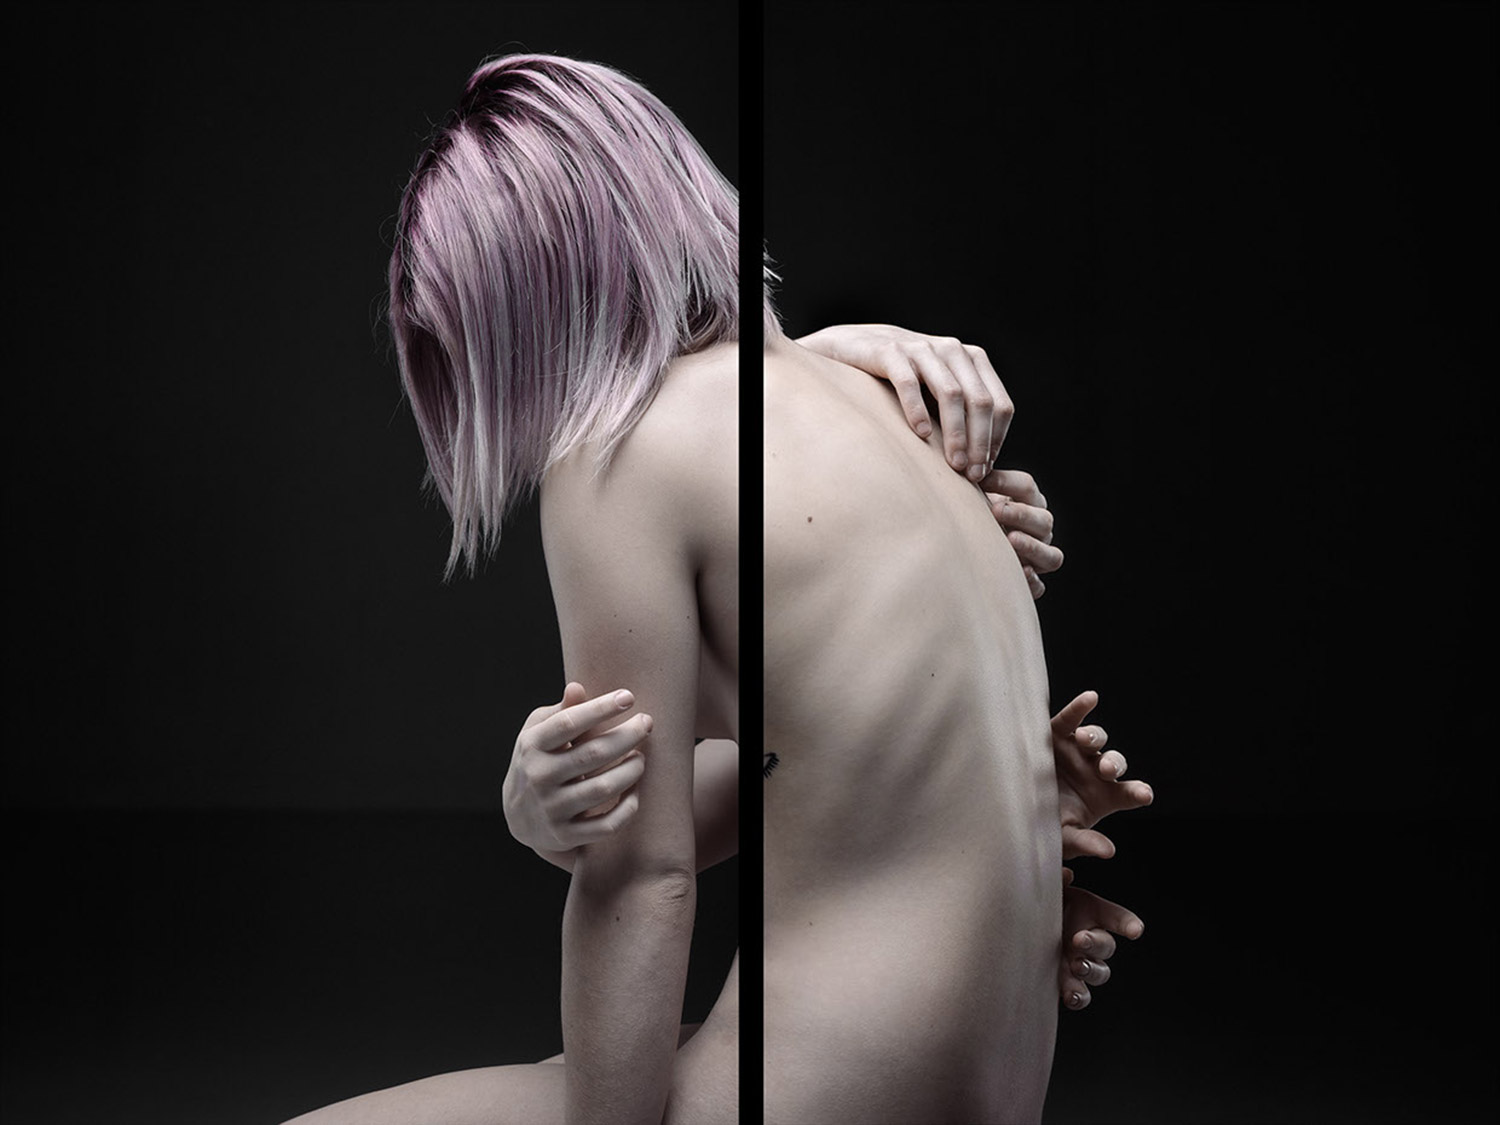 William Farges, Black Line - hands touching woman with purple hair